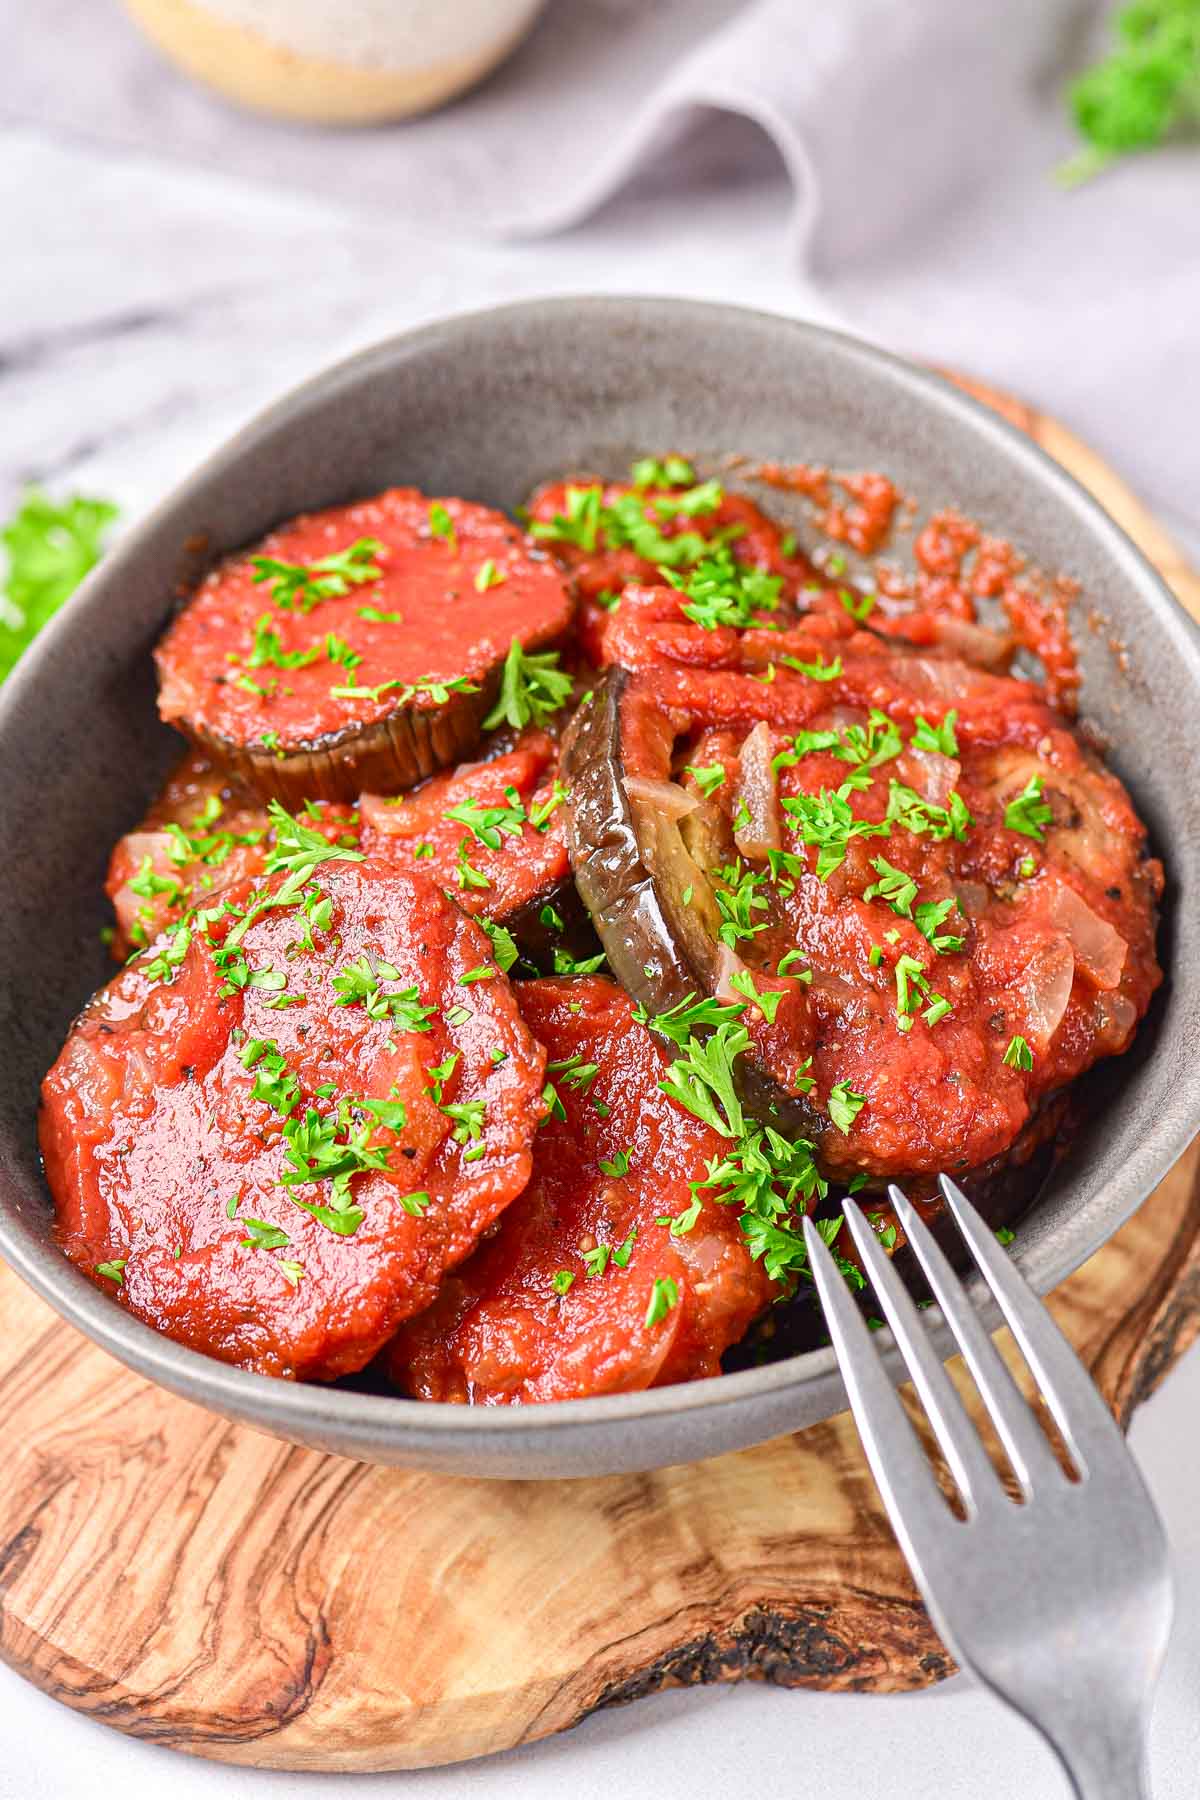 fried eggplant covered in red tomato puree in grey bowl with fork beside.